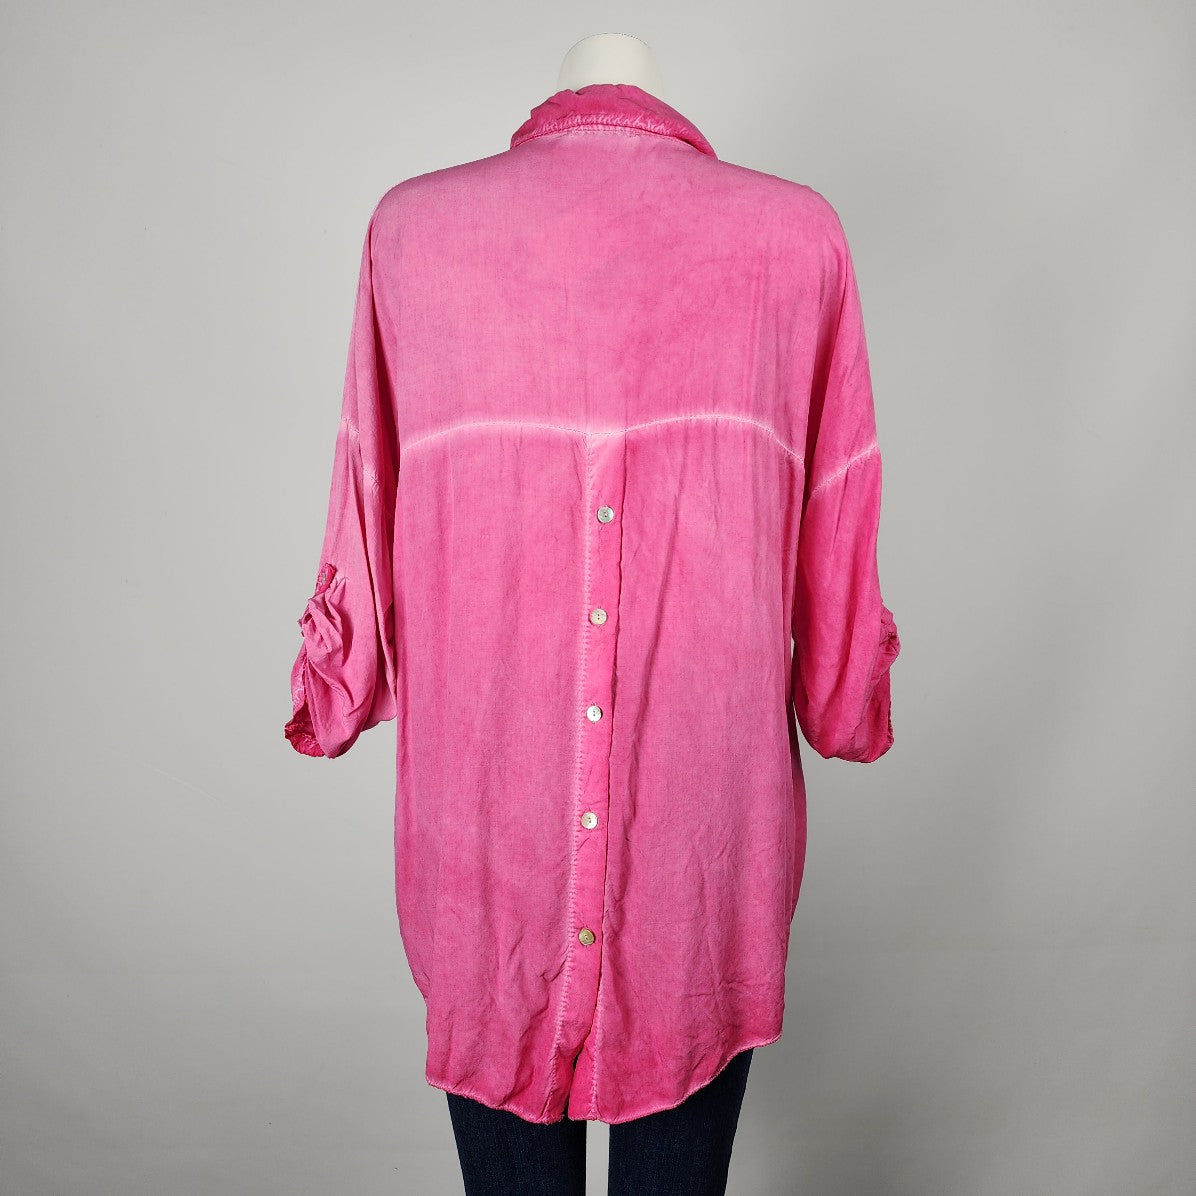 Meo Meli Made In Italy Pink Cotton Button Up Blouse Size L